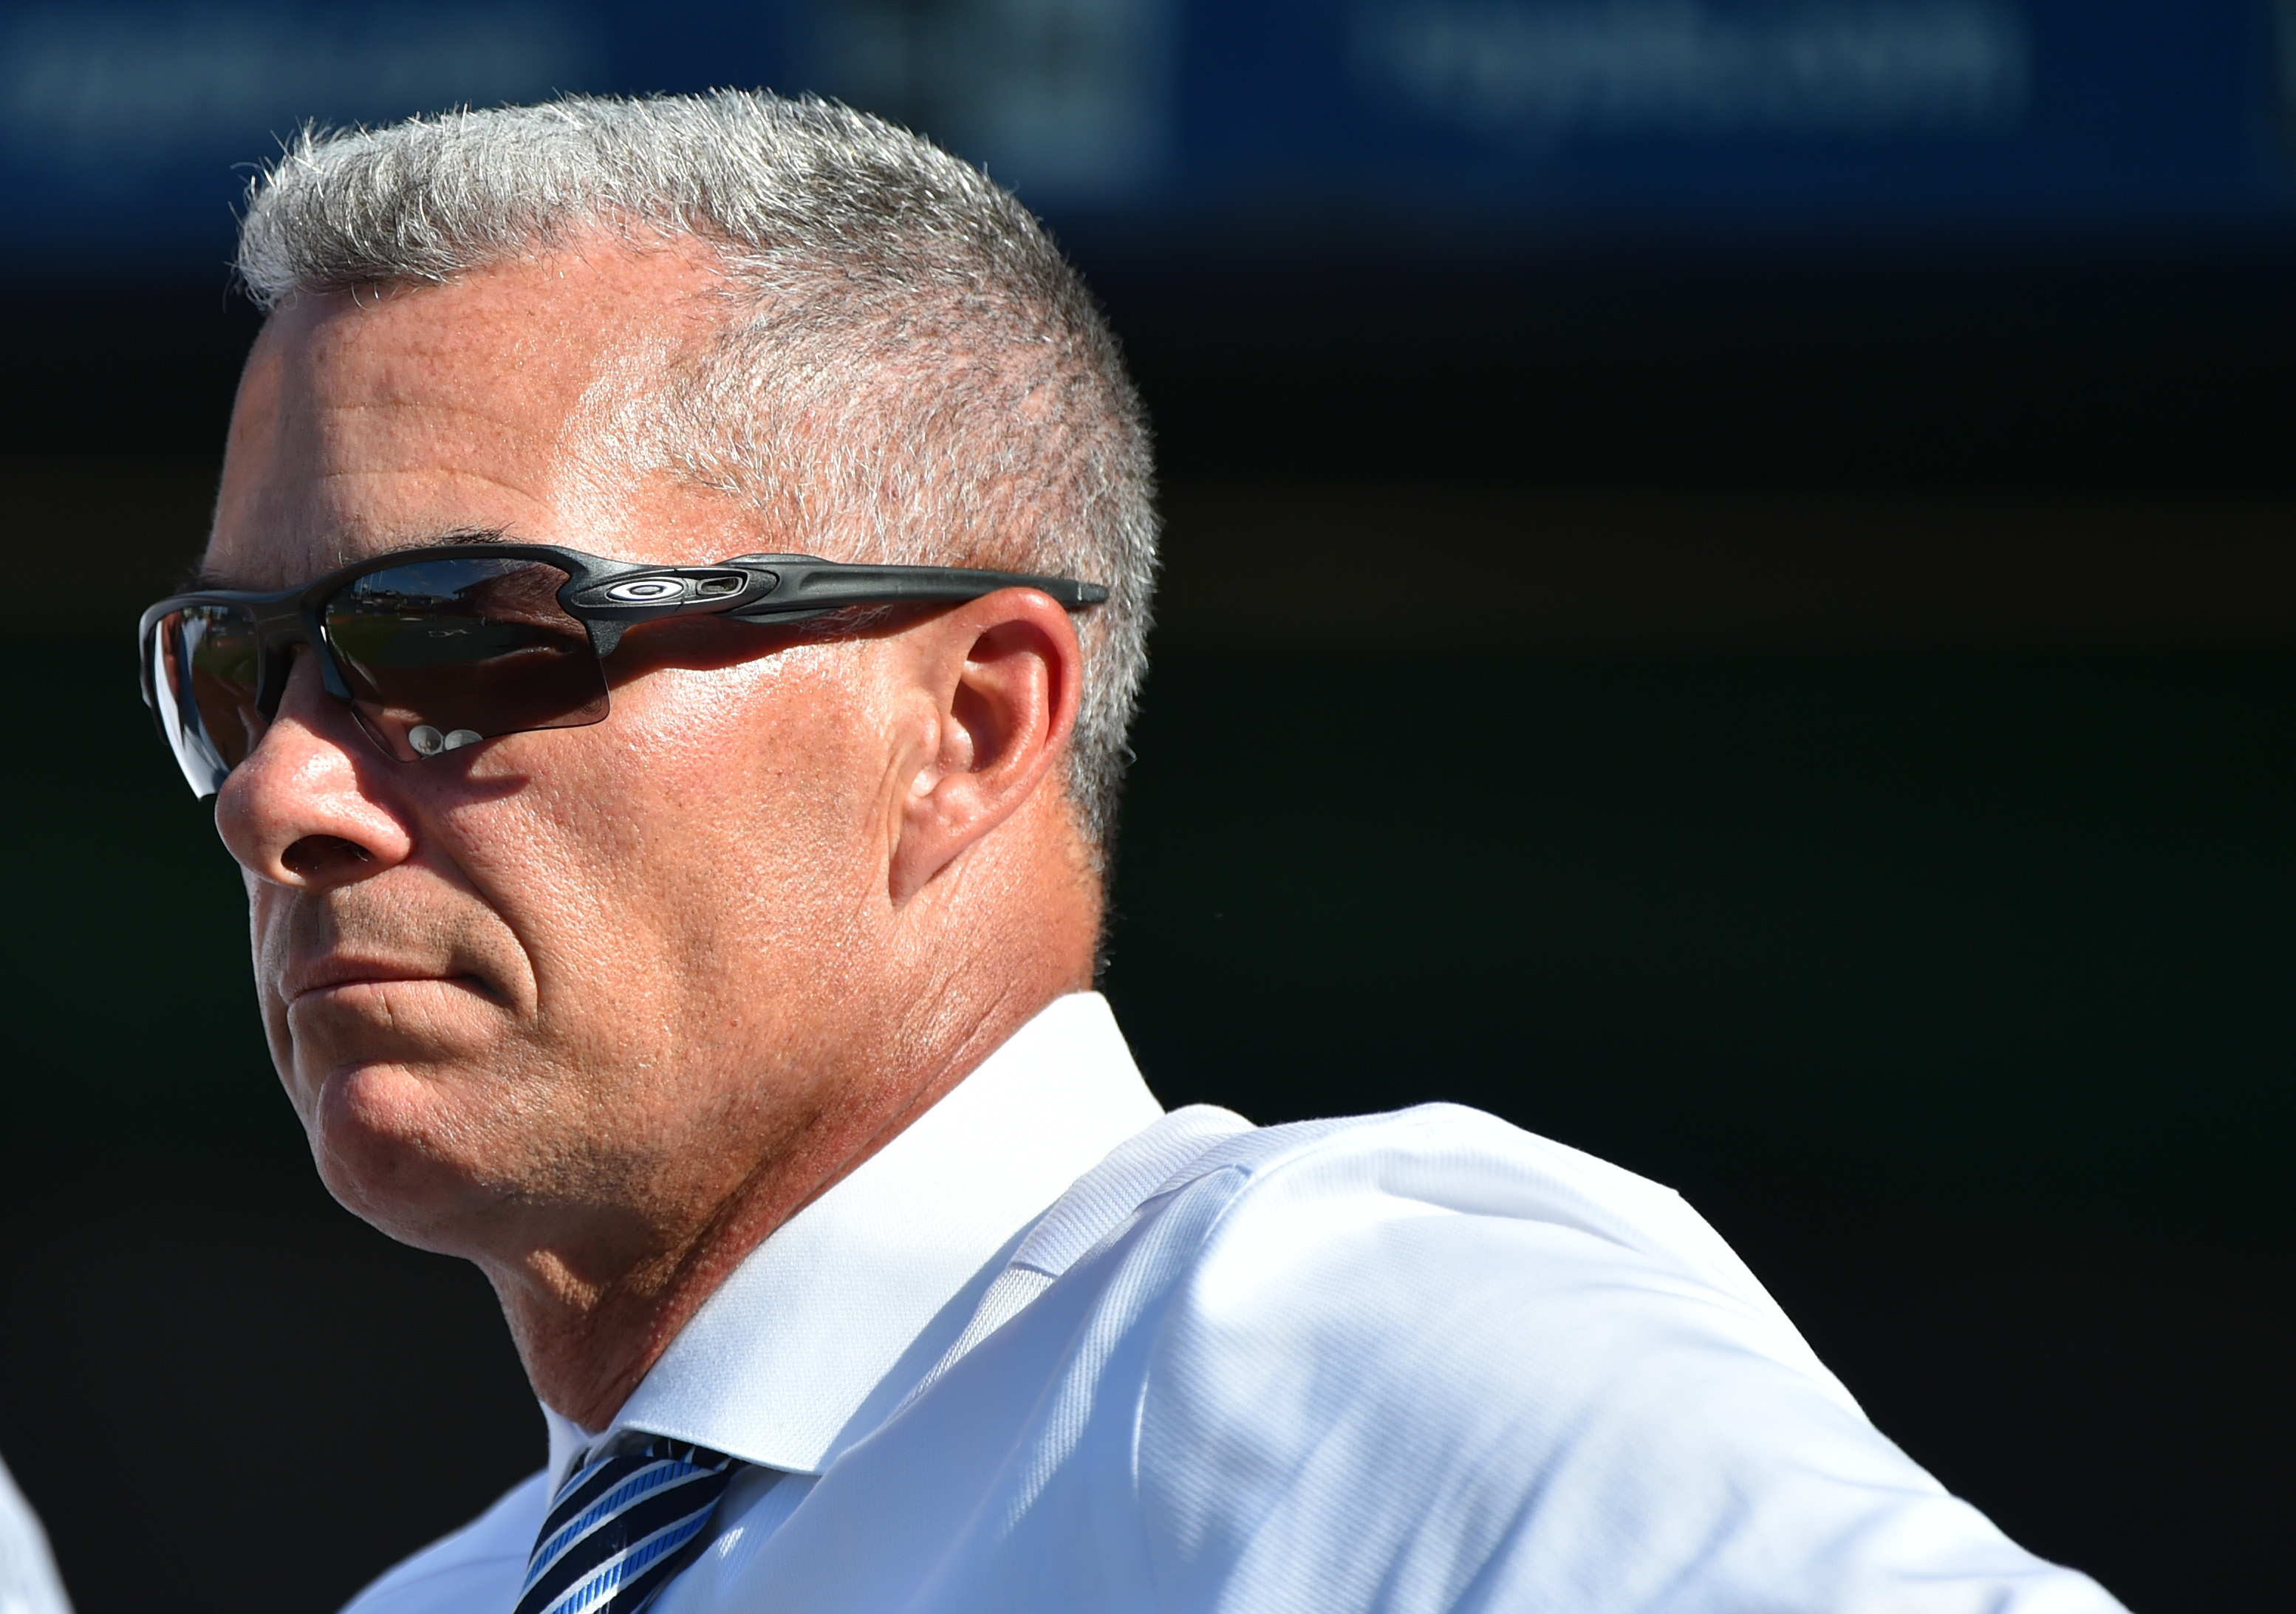 General manager Dayton Moore of the Kansas City Royals watches batting practice prior to a game against the Baltimore Orioles at Kauffman Stadium on August 30, 2019 in Kansas City, Missouri. Owner David Glass has agreed to to sell the team to a group led by Kansas City business man John Sherman for an estimated $1 billion.